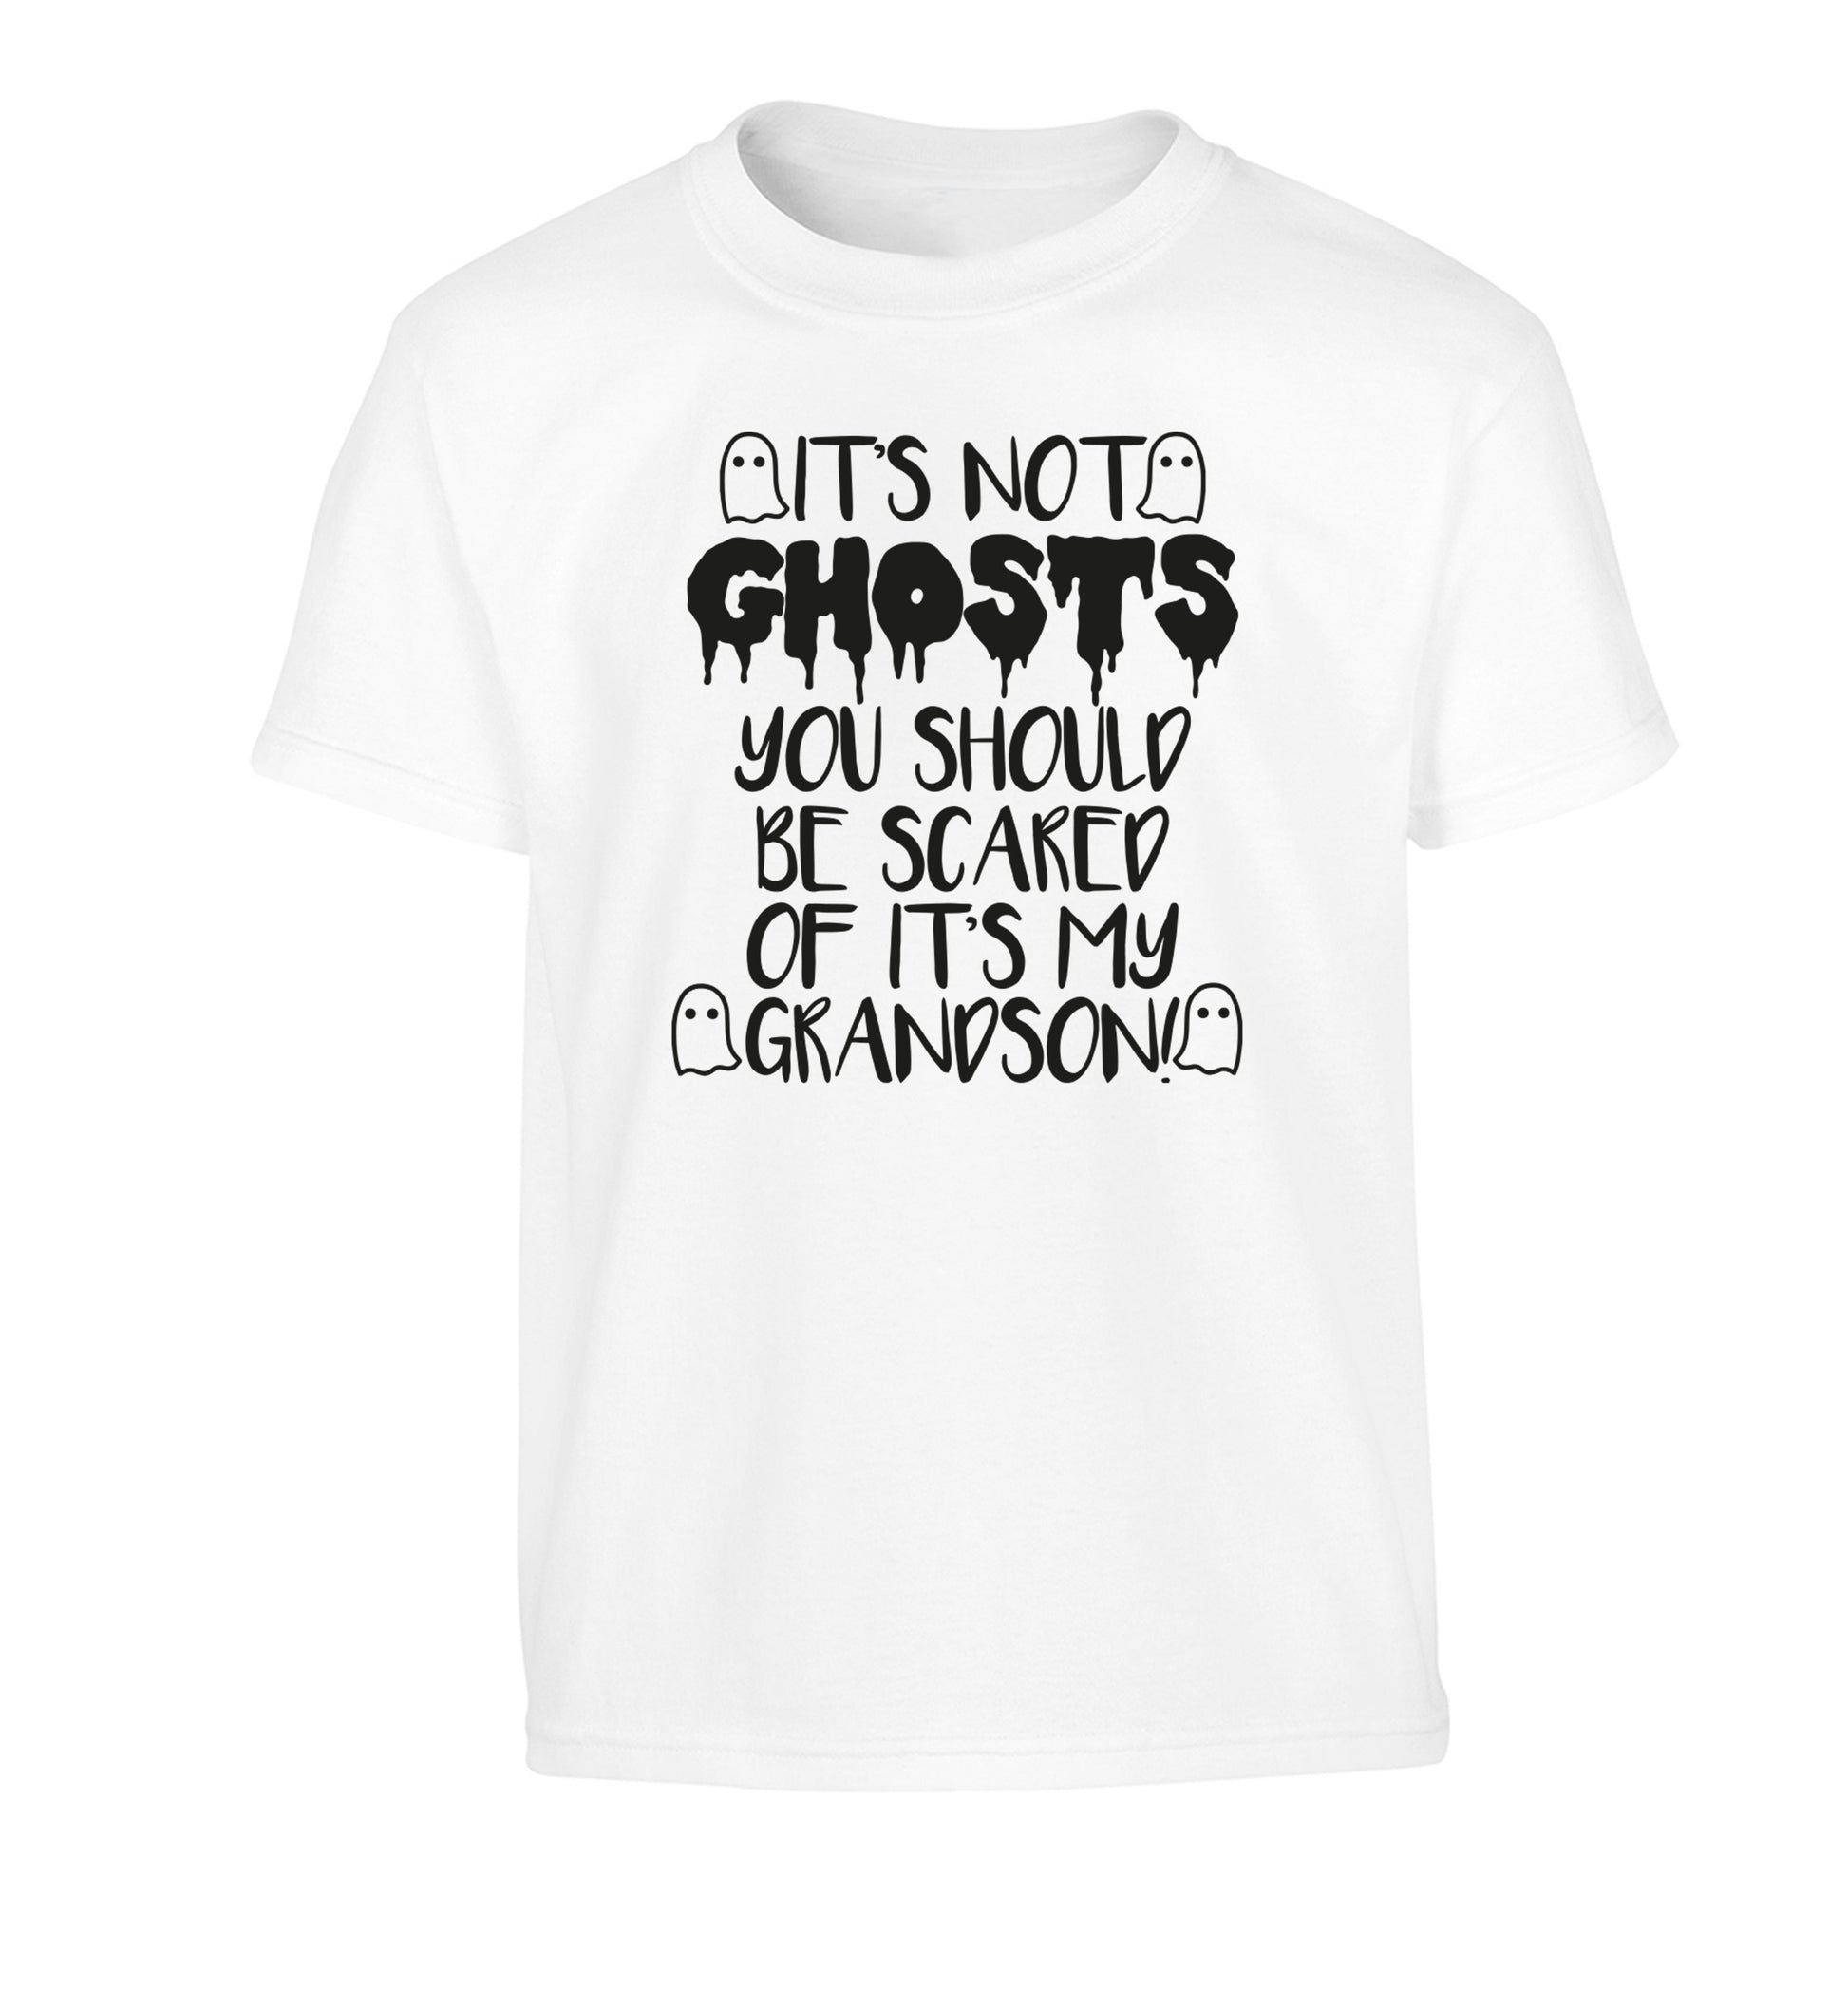 It's not ghosts you should be scared of it's my grandson! Children's white Tshirt 12-14 Years